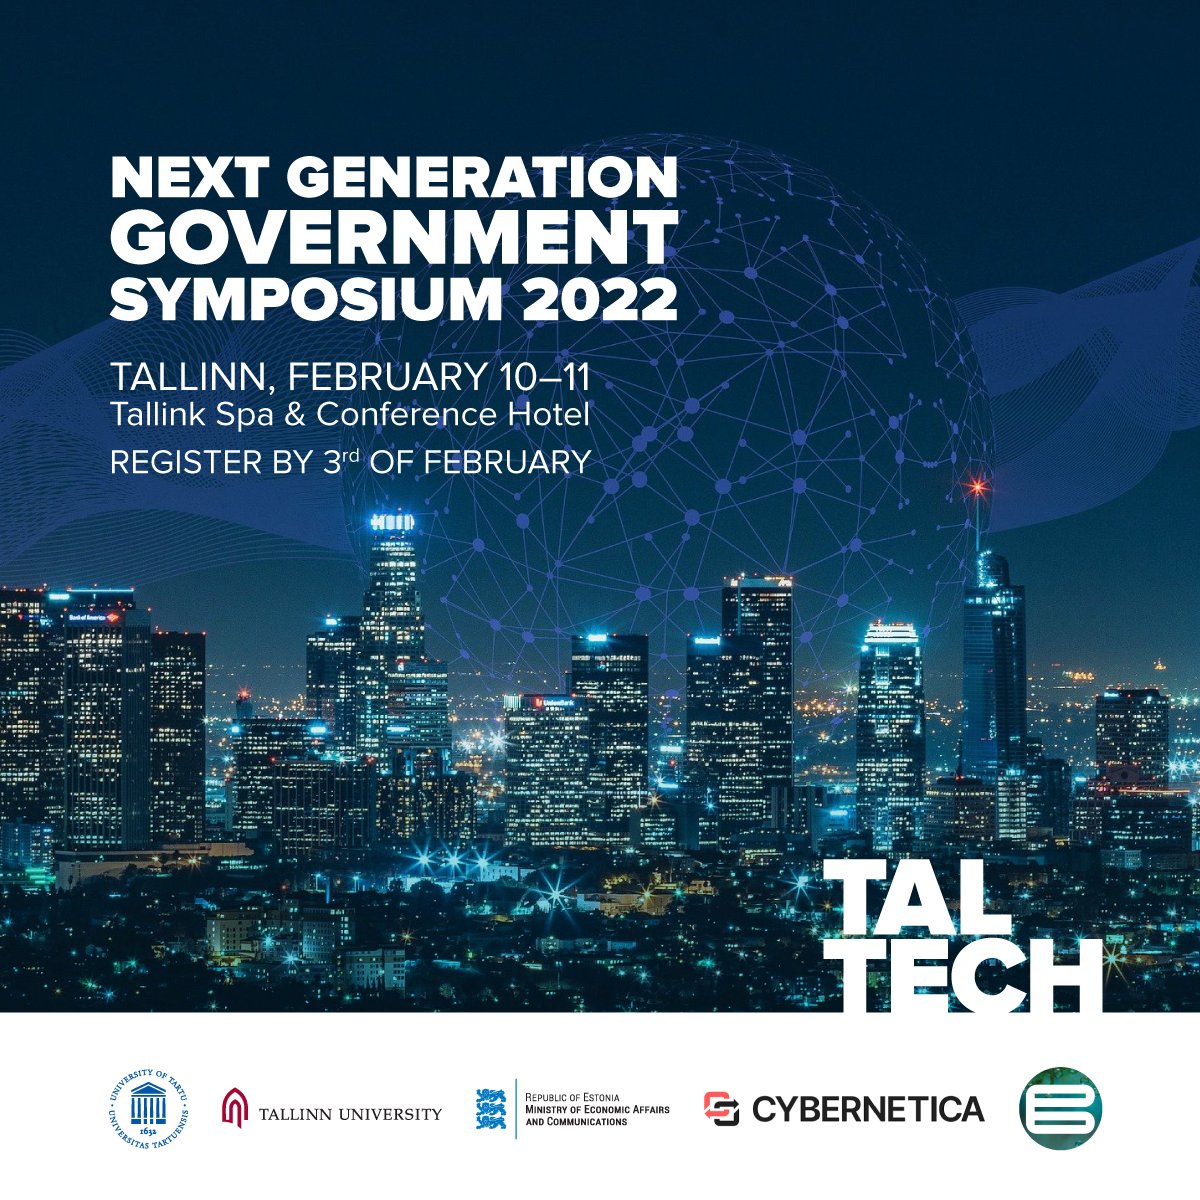 The @TallinnTech School of IT is hosting a Next Generation Government Symposium, featuring also our CTO Arne Ansper. The event focuses on #digitaltransformation & interdisciplinary approach to building #digitalsocieties.

📌Registration and more info: taltech.ee/en/events/next…